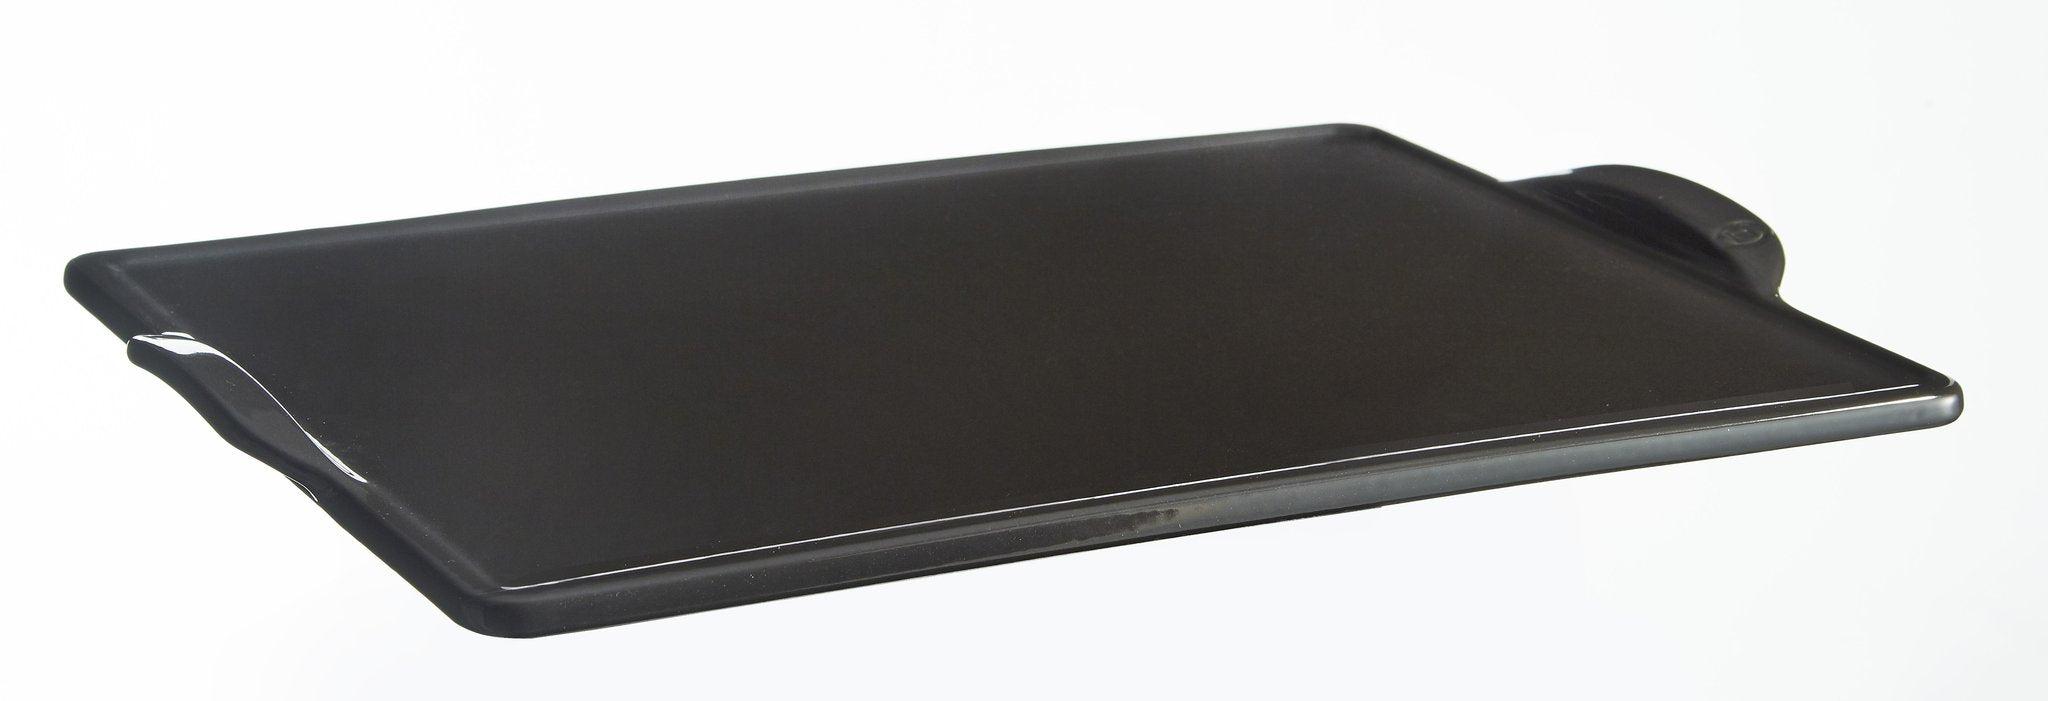 Charcoal Rectangular Grilling Stone